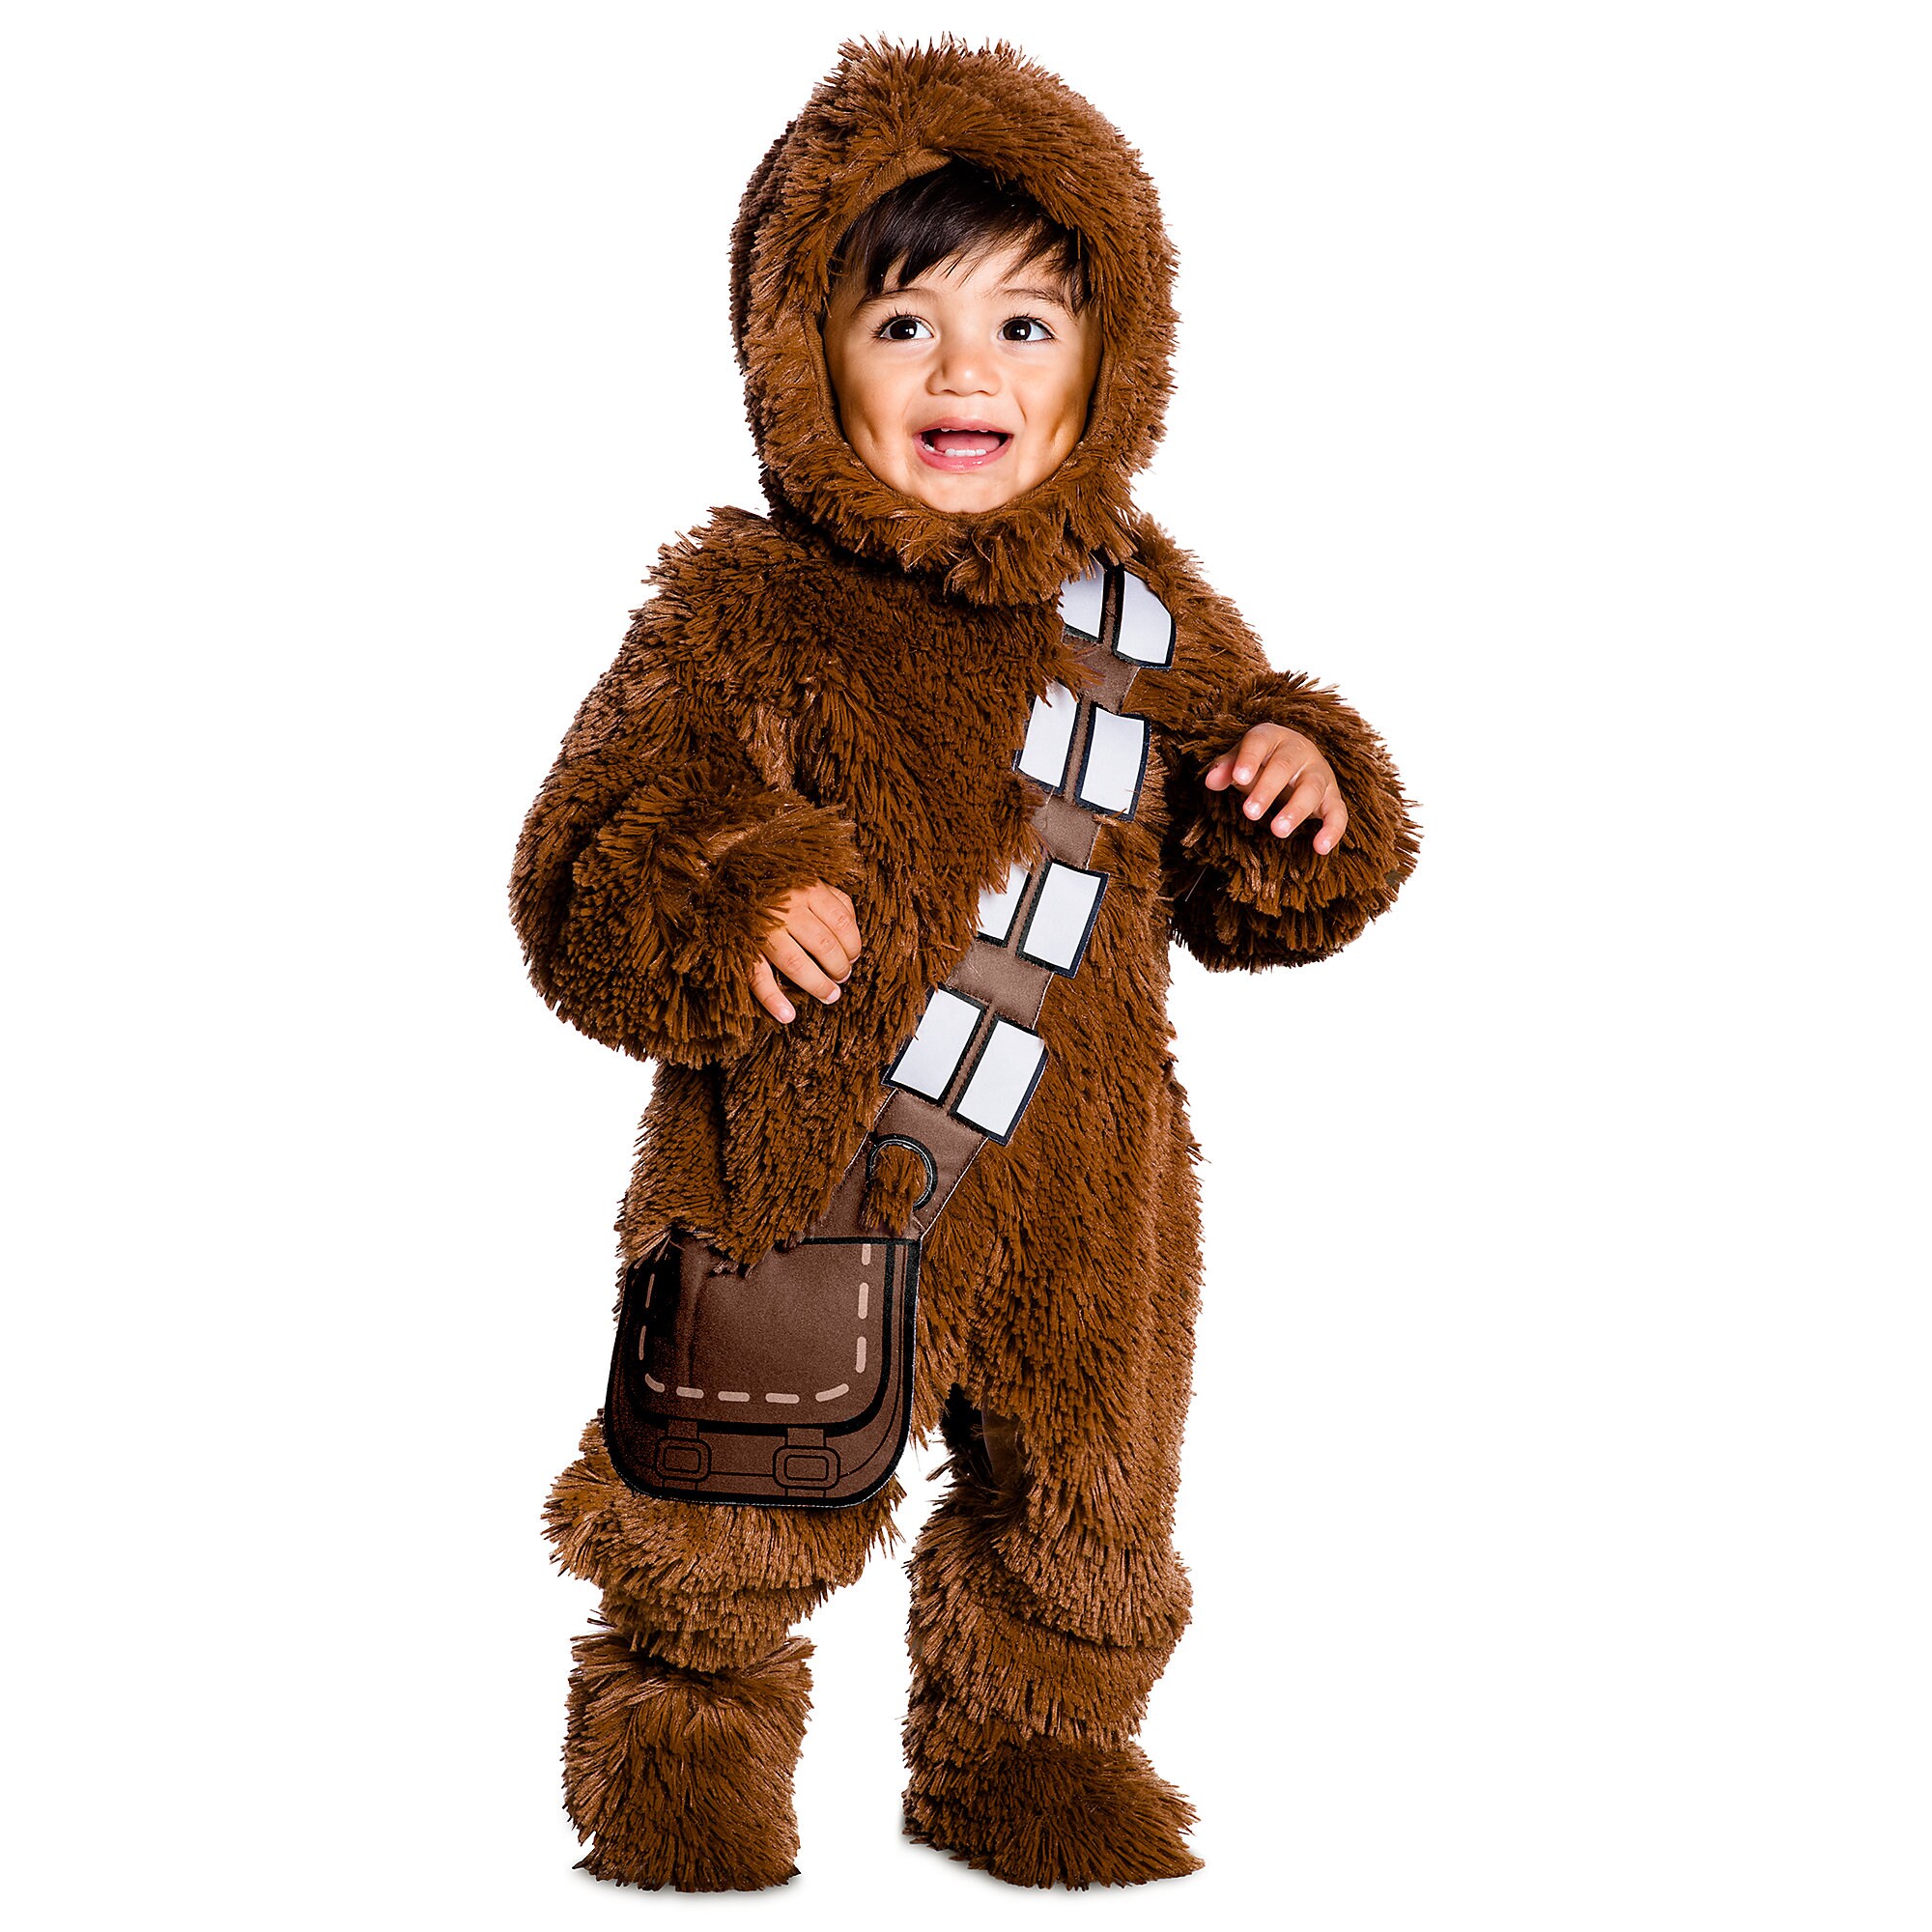 Chewbacca Costume for Baby by Rubie's - Star Wars